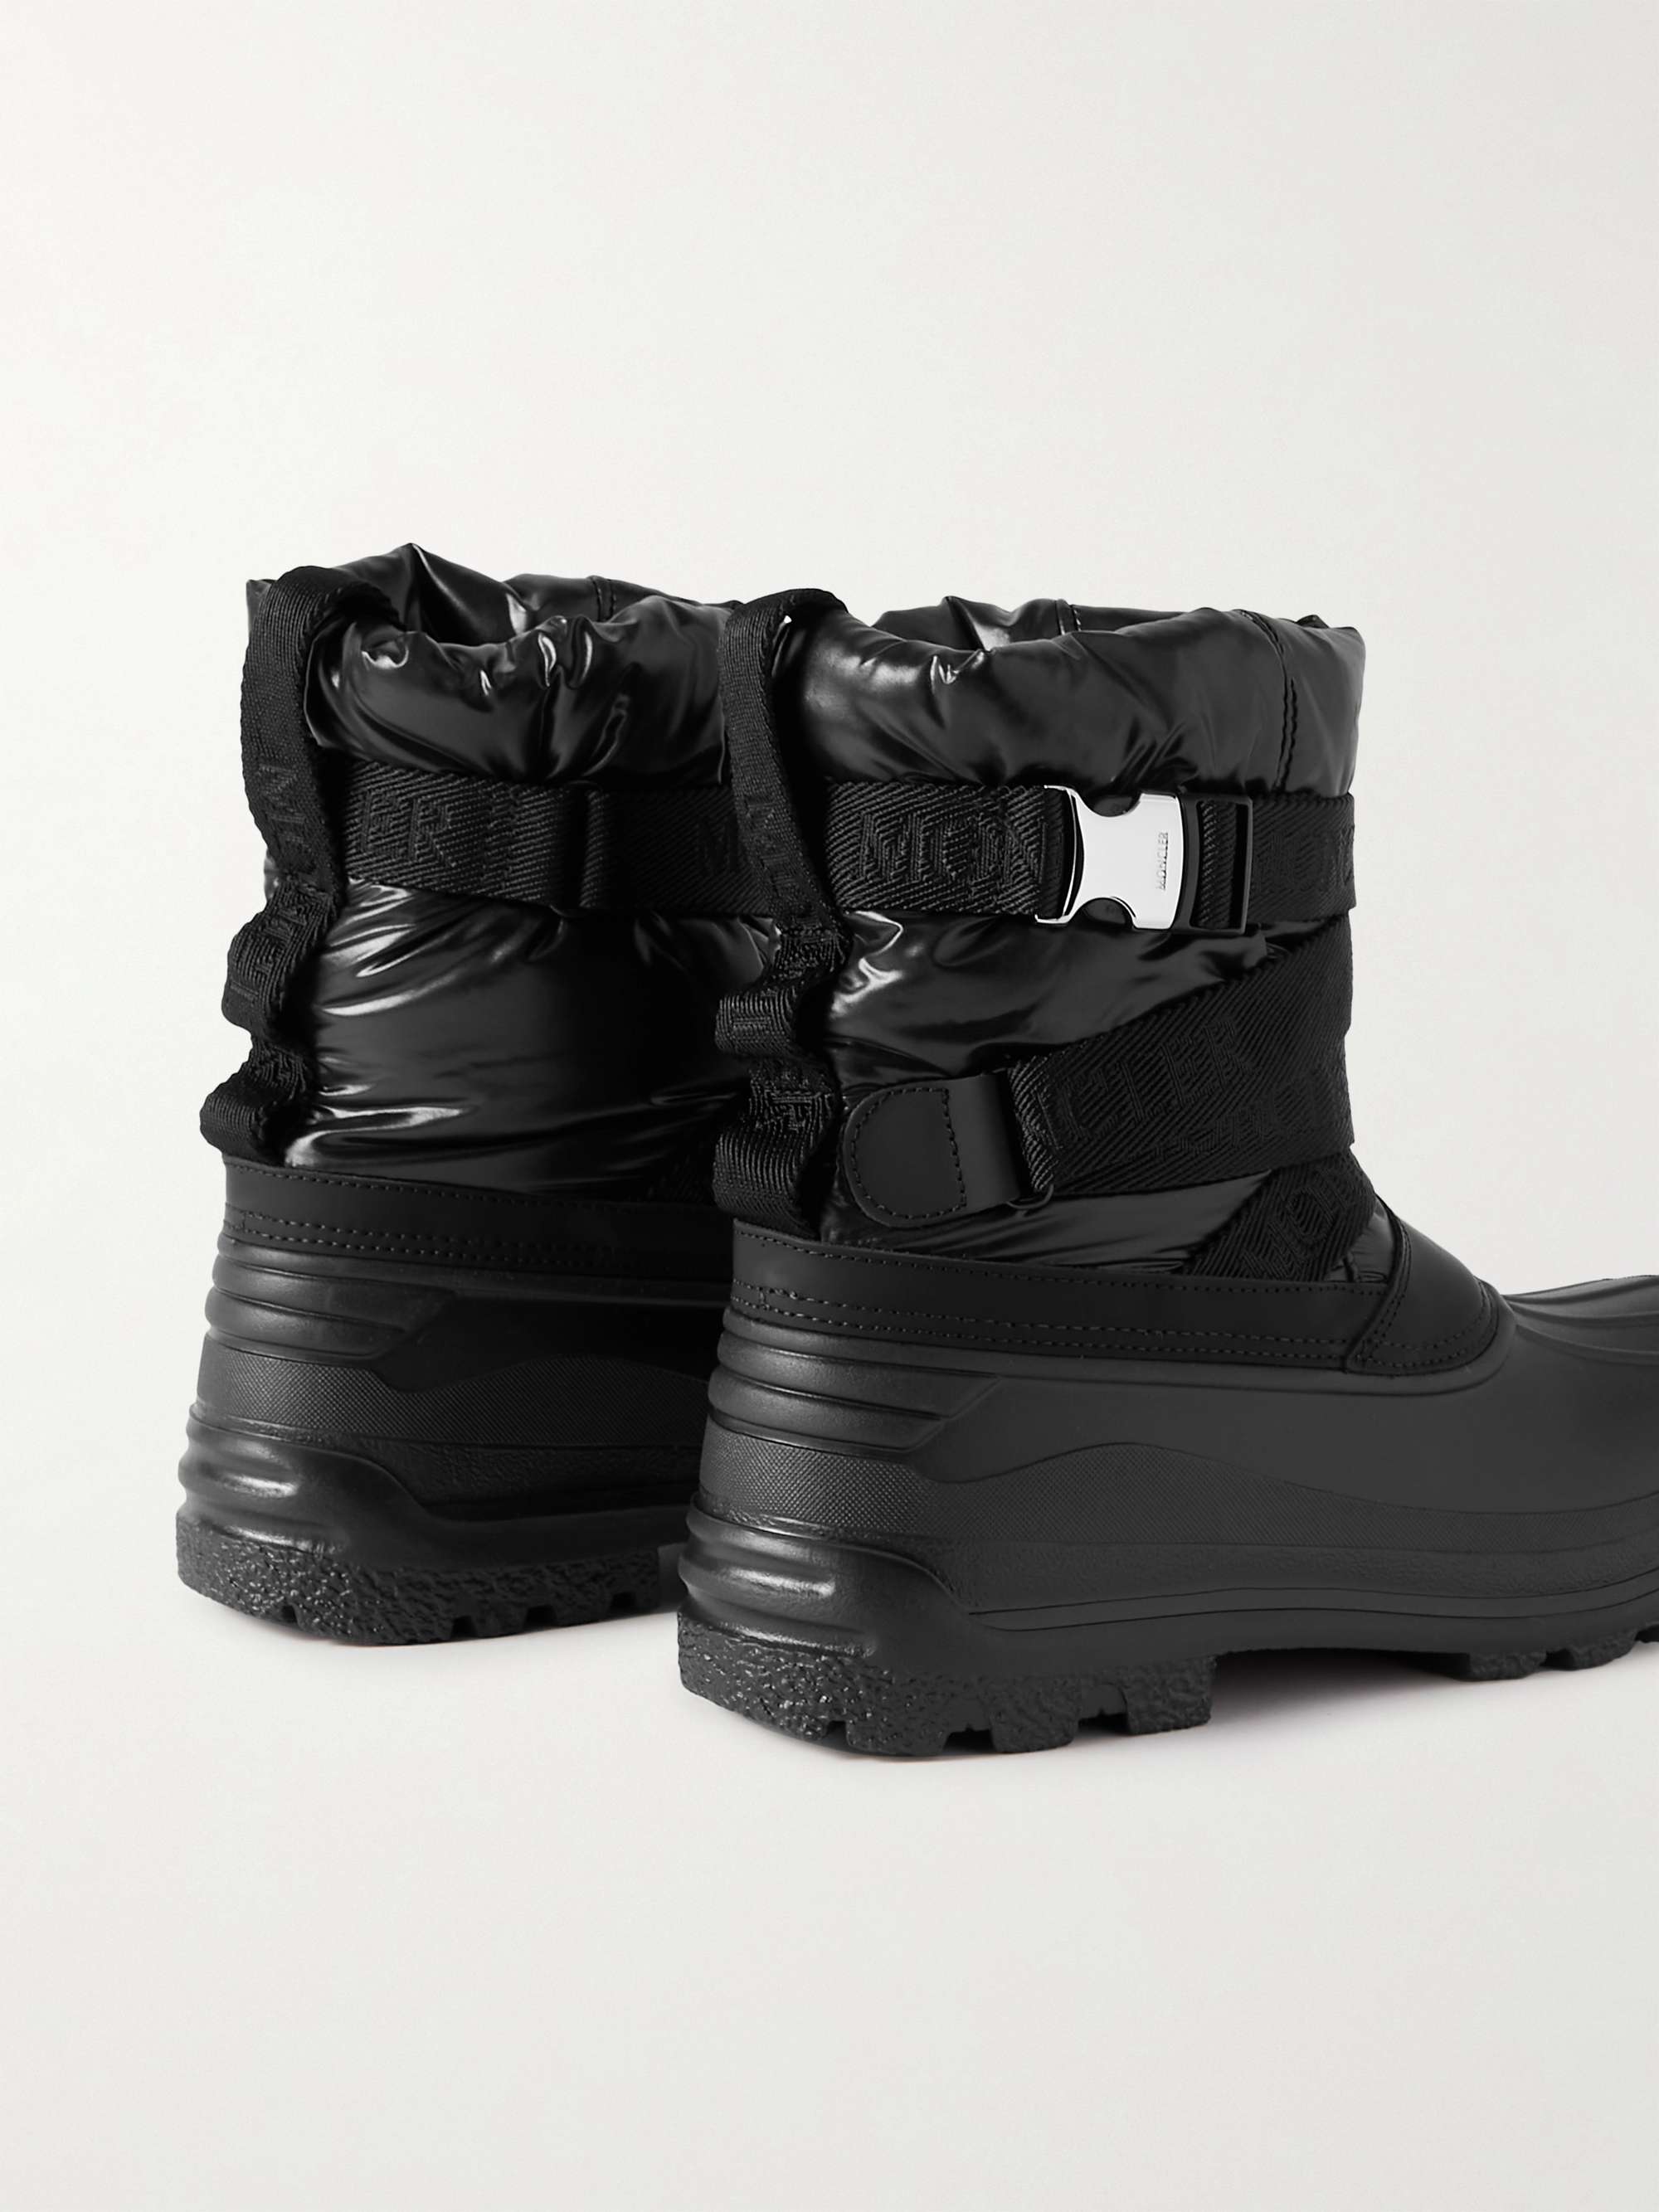 Summus Webbing-Trimmed Nylon and Rubber Snow Boots